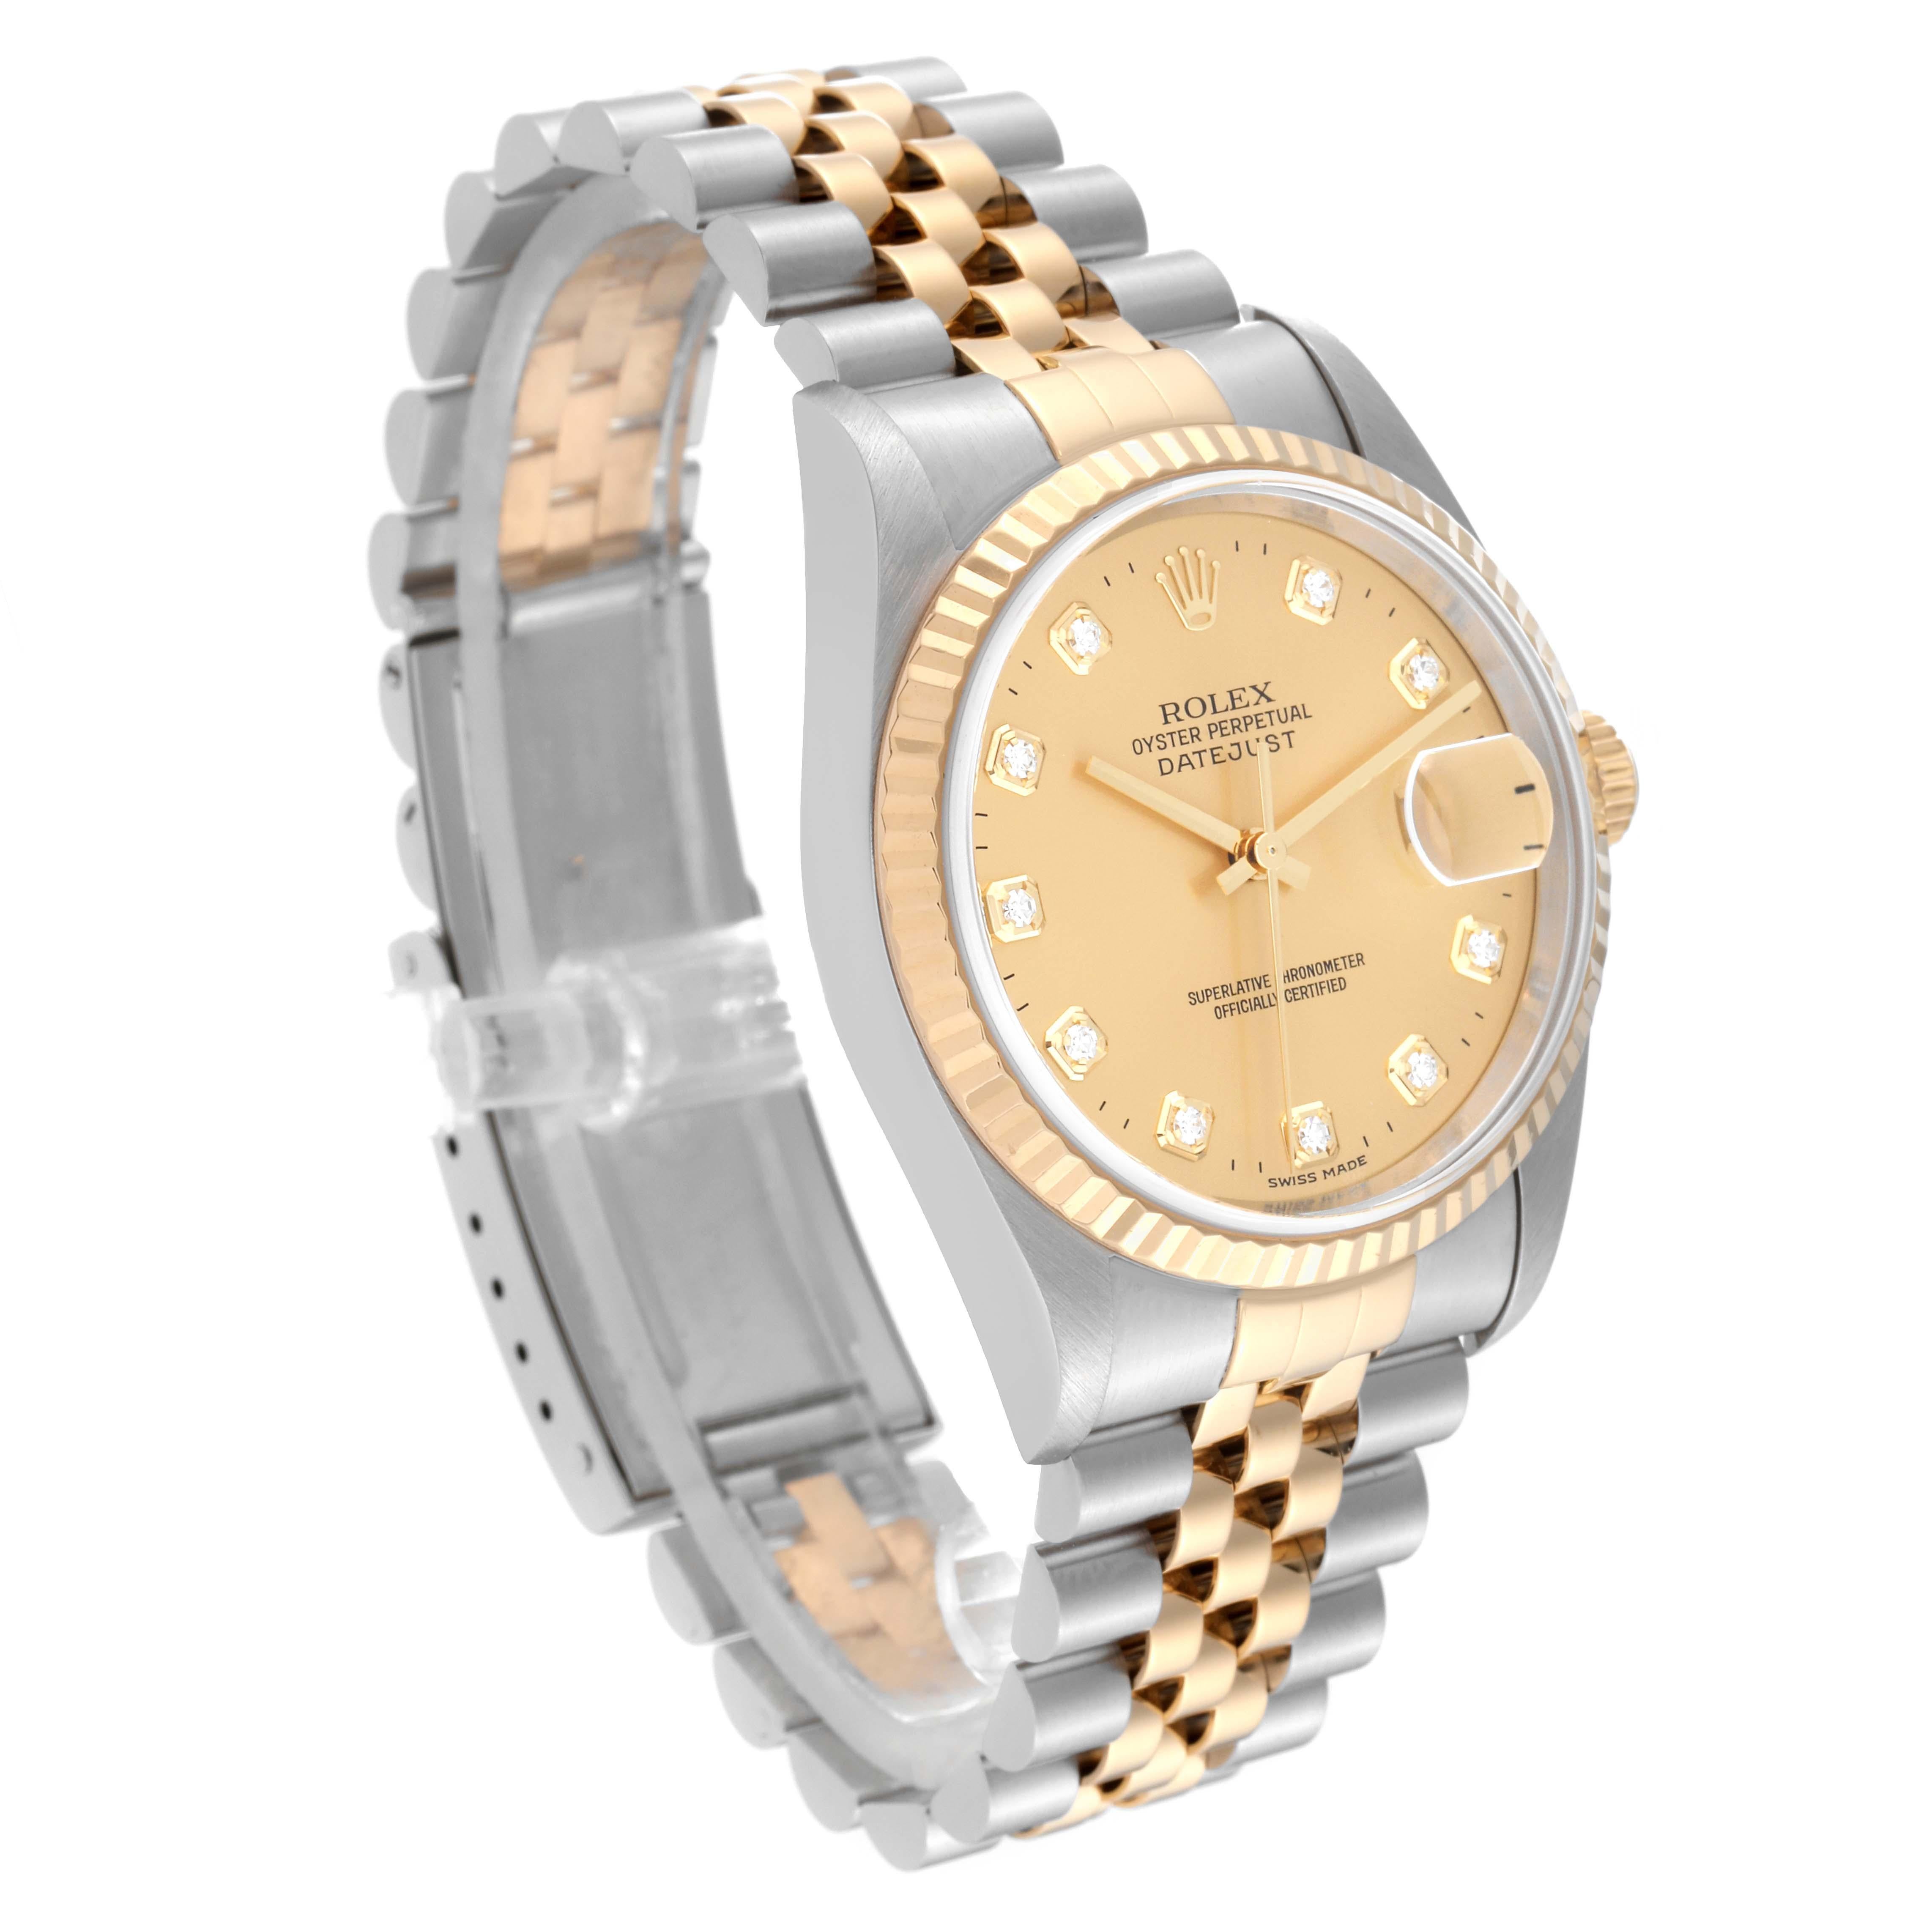 Rolex Datejust Champagne Diamond Dial Steel Yellow Gold Mens Watch 16233 1